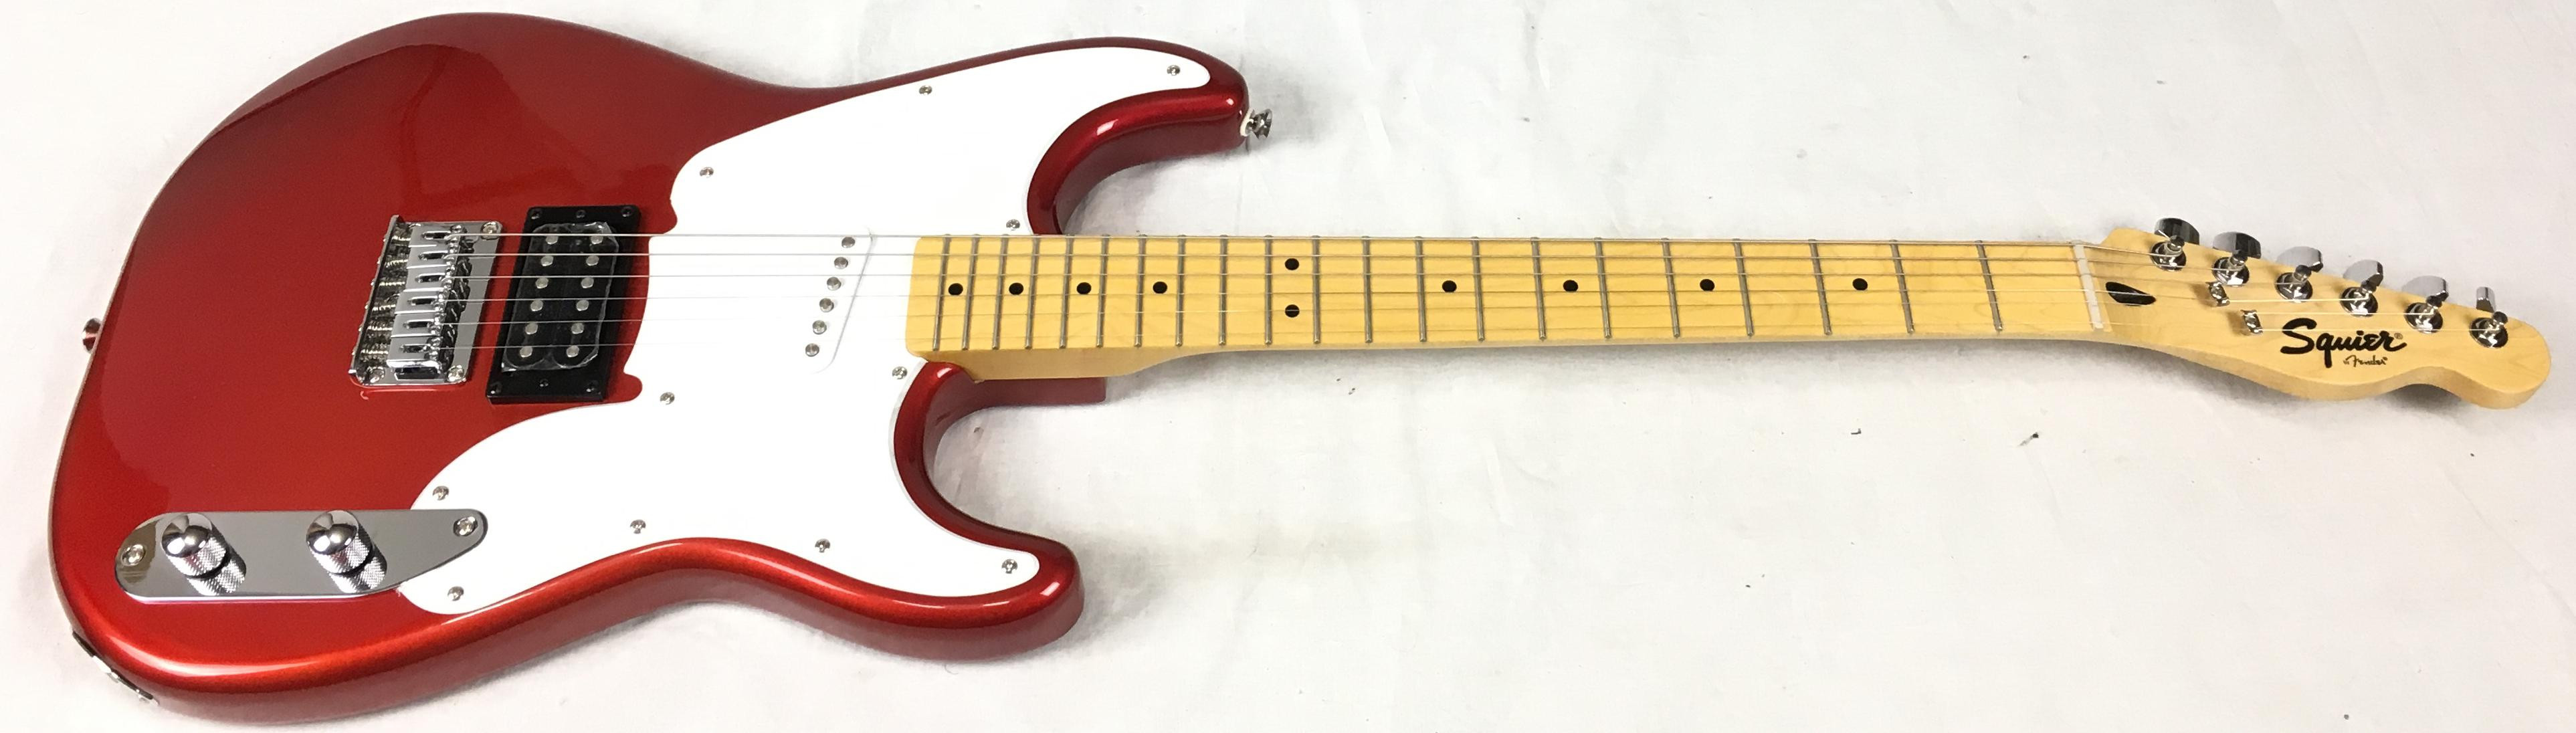 Chitarra Elettrica Fender Squier Vintage Modified 51 Candy Apple Red